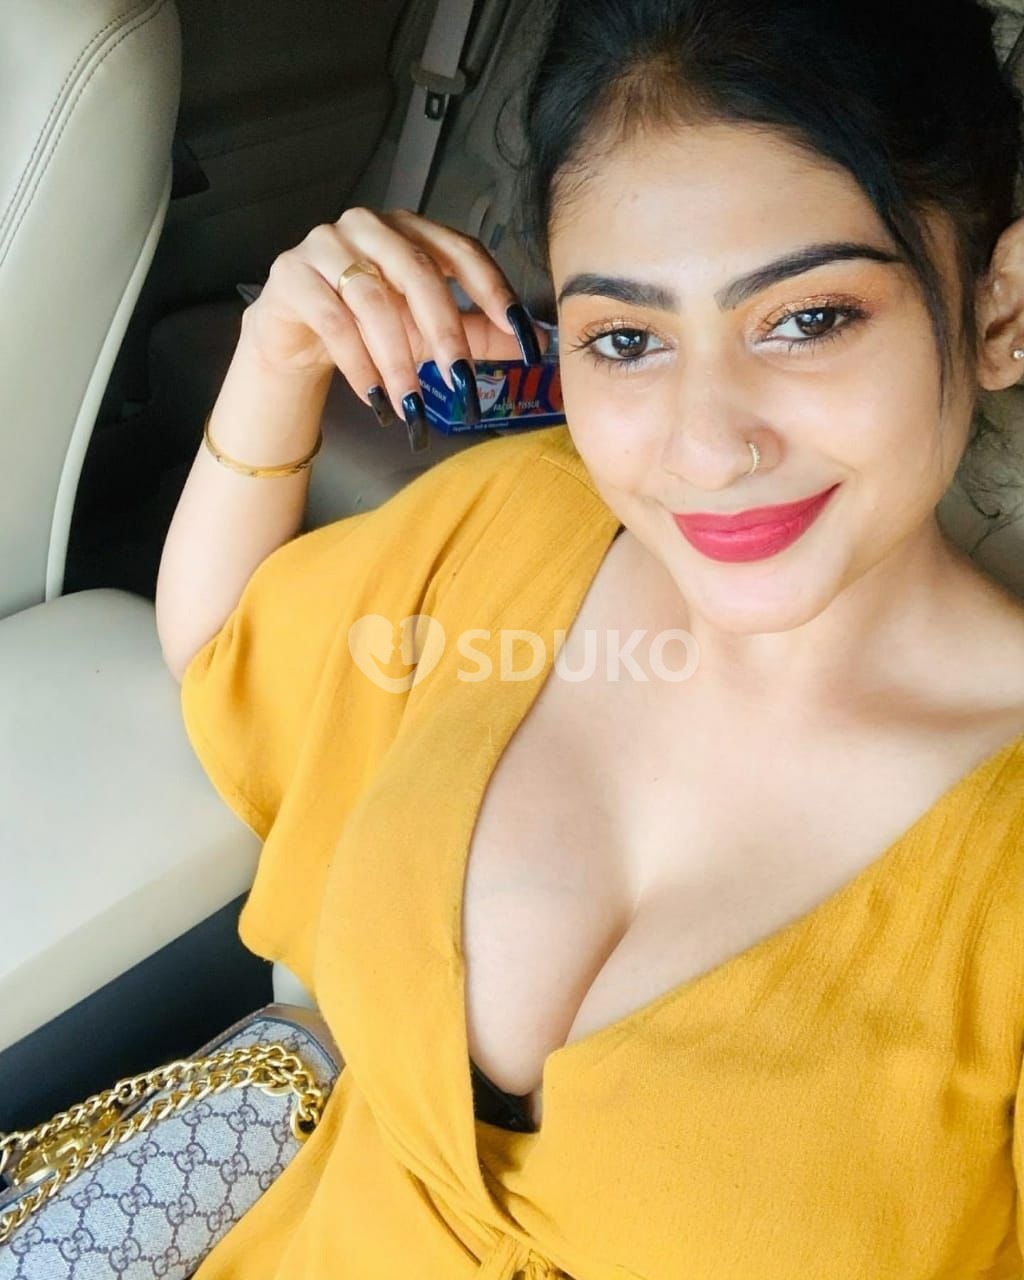 Viman Nagar 92564/71656 now available call girl service full safe and secure without condom sucking kissing all services